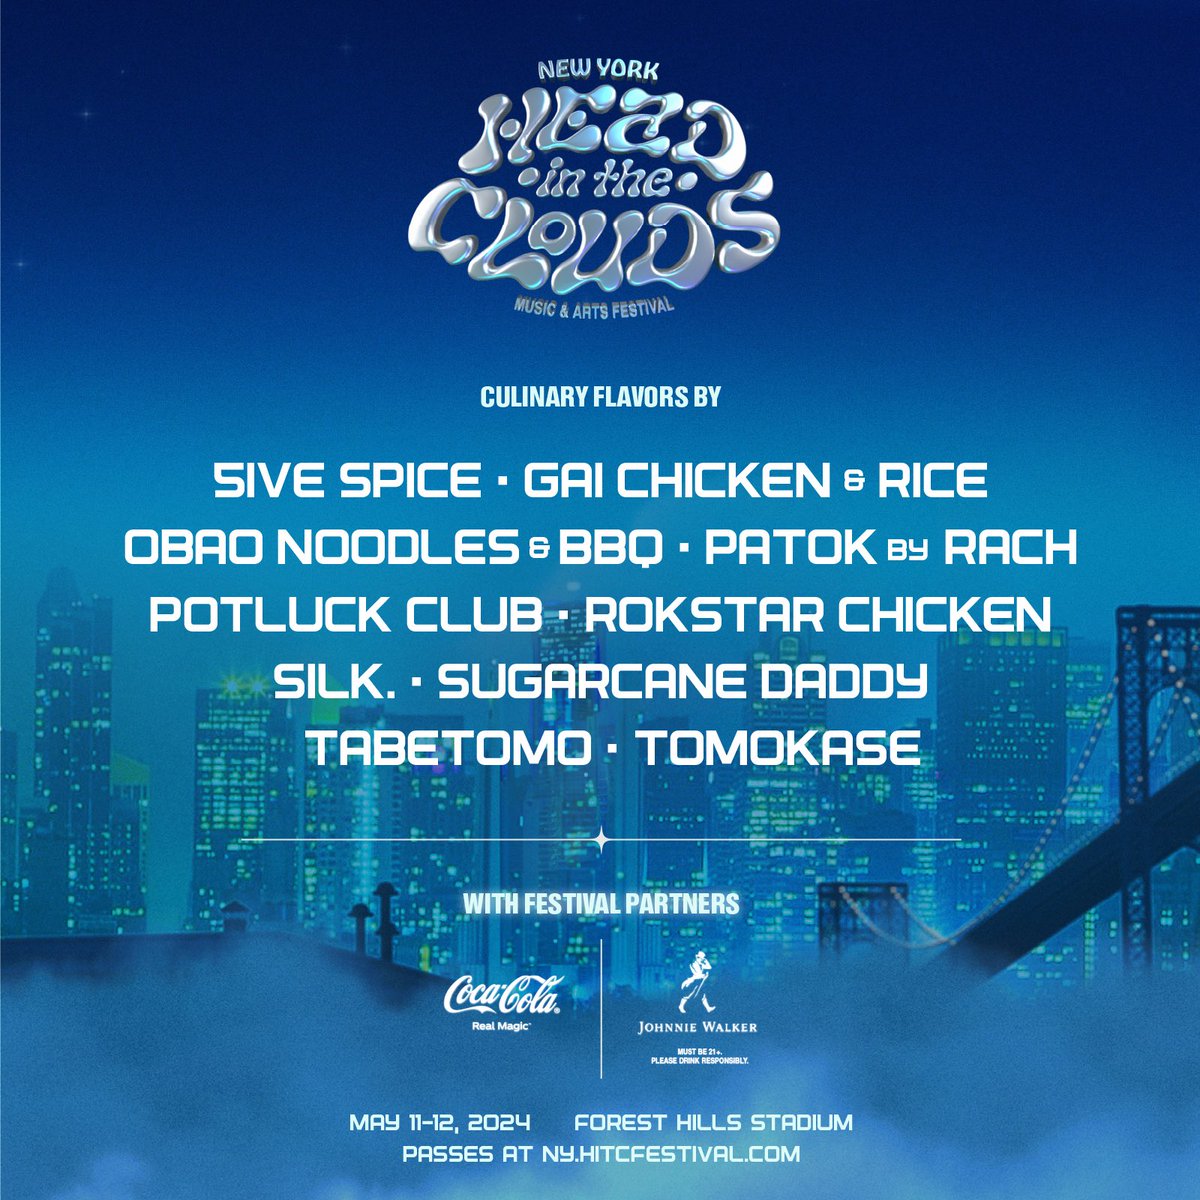 HEAD IN THE CLOUDS NY FOOD & BEVERAGE LINEUP! ❤️🍴 some of our favorite spots in NYC See you May 11 & 12 at Forest Hills Stadium ☁️ Single & 2-Day passes available now at ny.hitcfestival.com